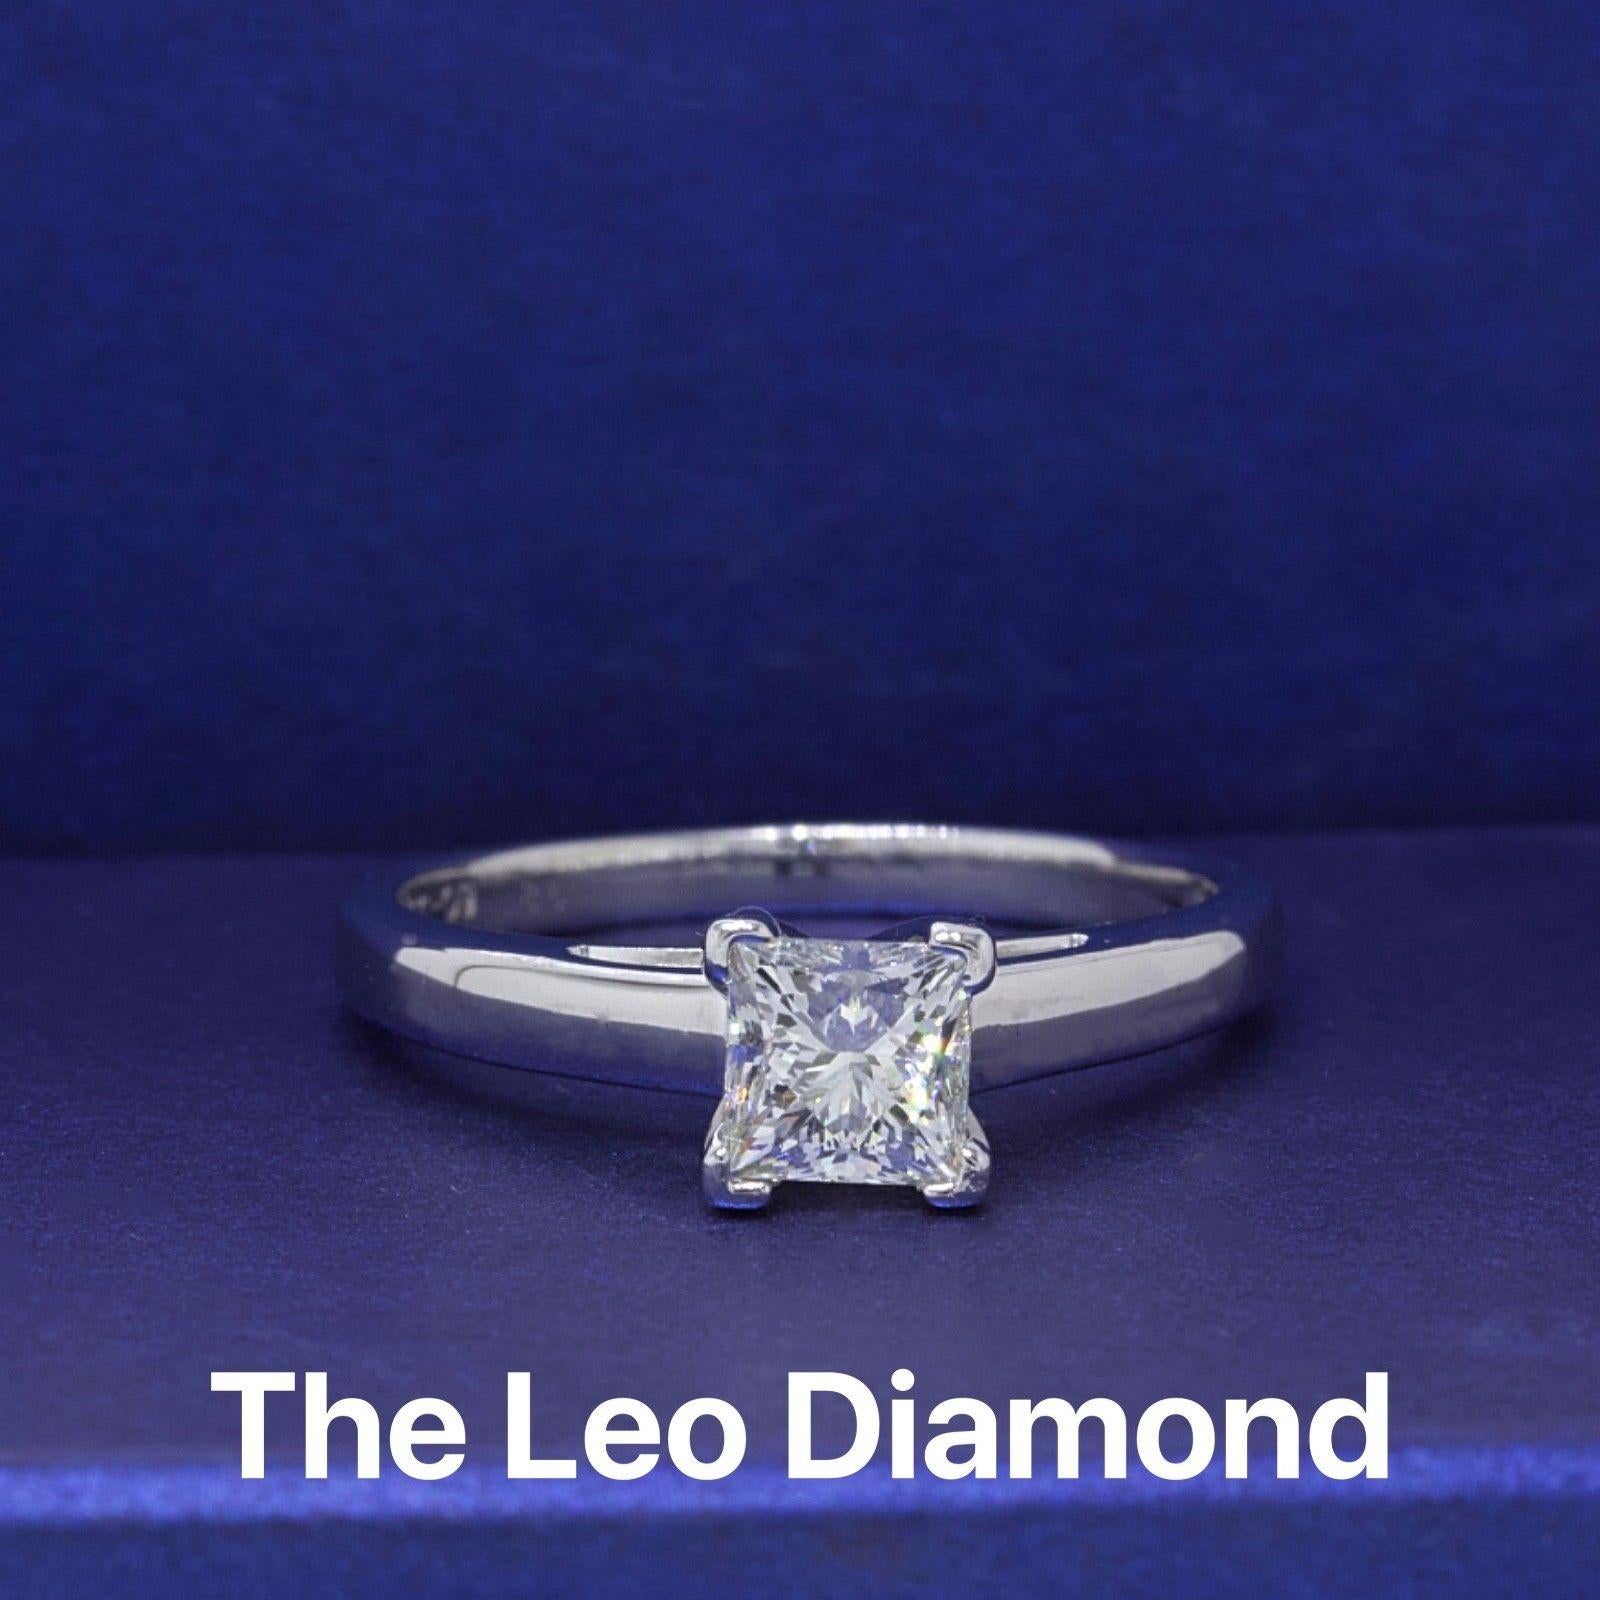 LEO DIAMOND
Style: 4 Prong Solitaire
Serial Number: LEO 146322S
Year Purchased: 2011
Metal: 14 KT White Gold & Platinum 950
Size:  7.5 - sizable
Total Carat Weight:  0.83 CTS
Diamond Shape:  Princess Cut
Diamond Color & Clarity: I / SI1
Comments: 